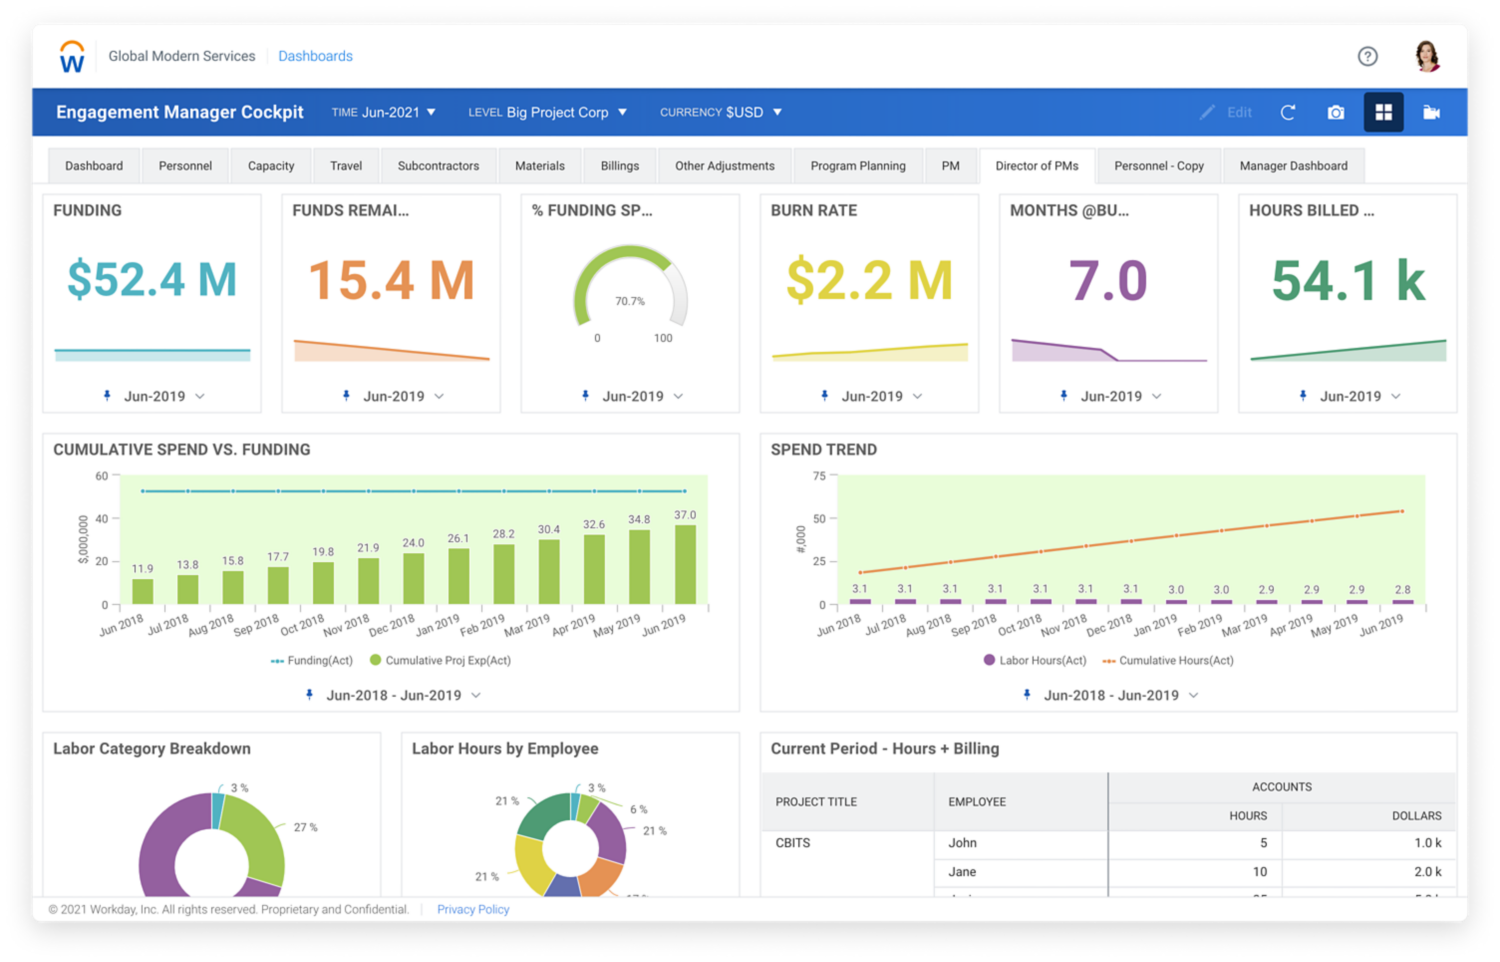 Marketing planning dashboard in Workday Adaptive Planning, showing numerical values to analyze marketing pipeline by region, quarter, and spend.